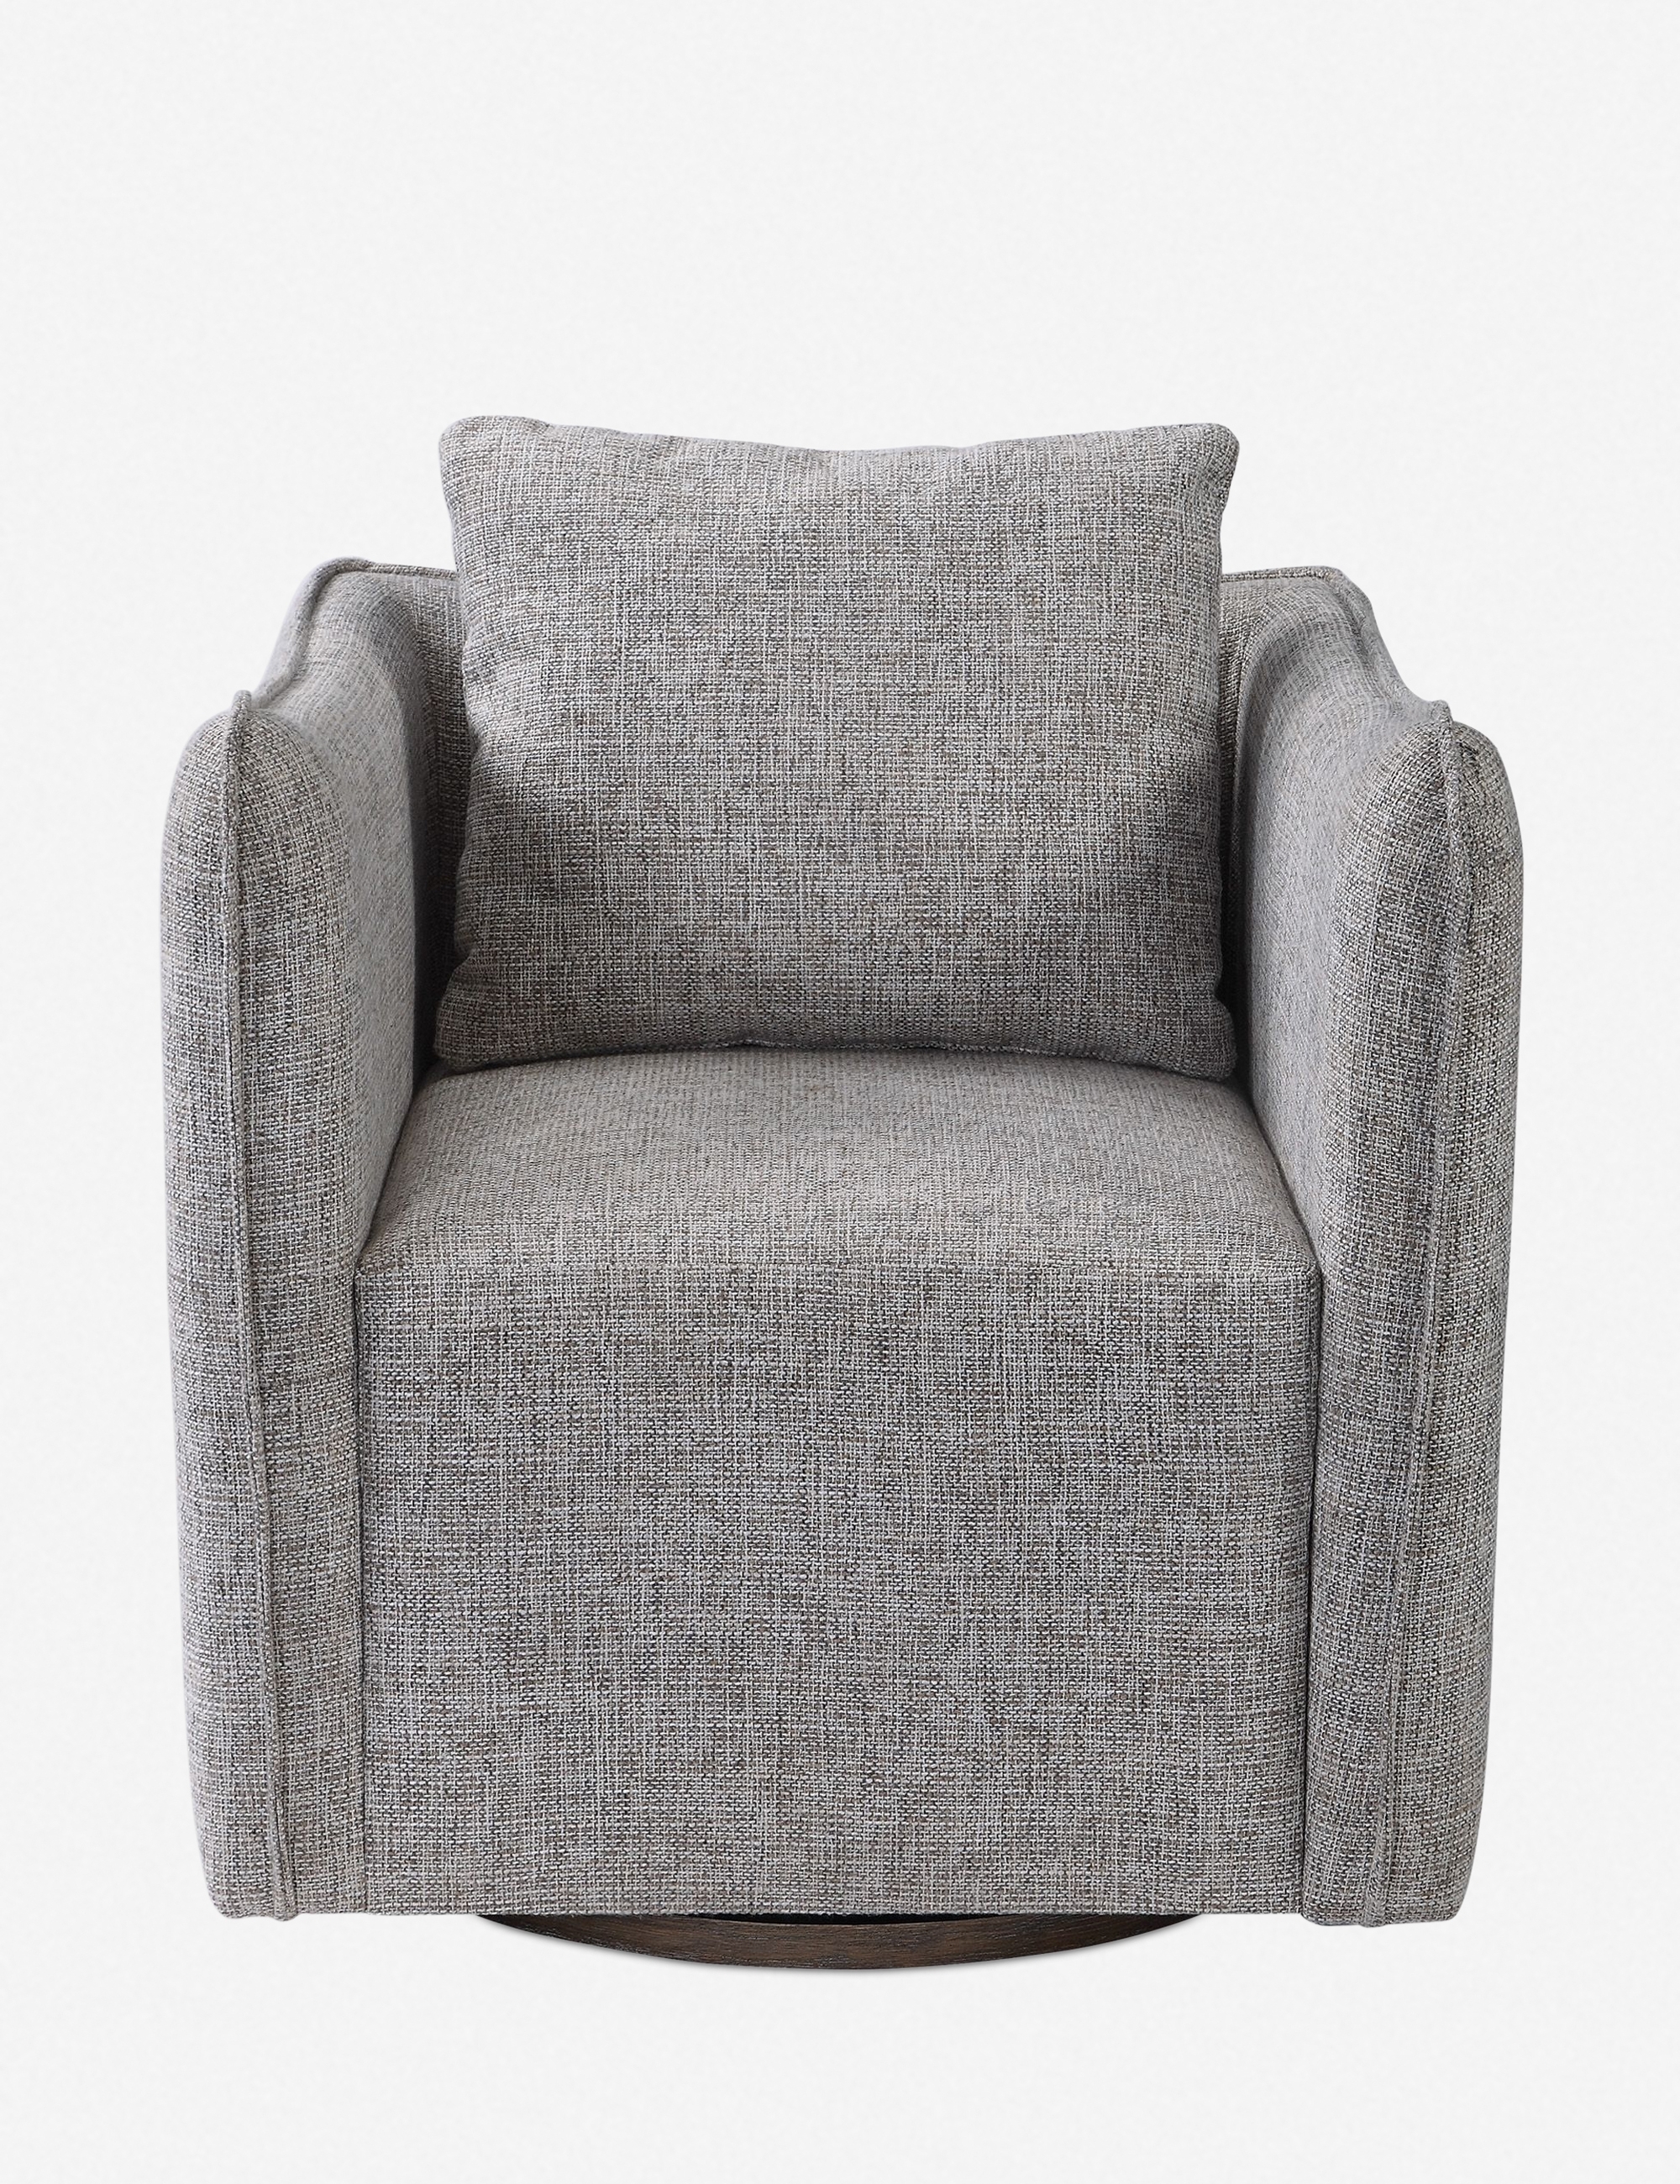 Aisling Swivel Chair - Image 0